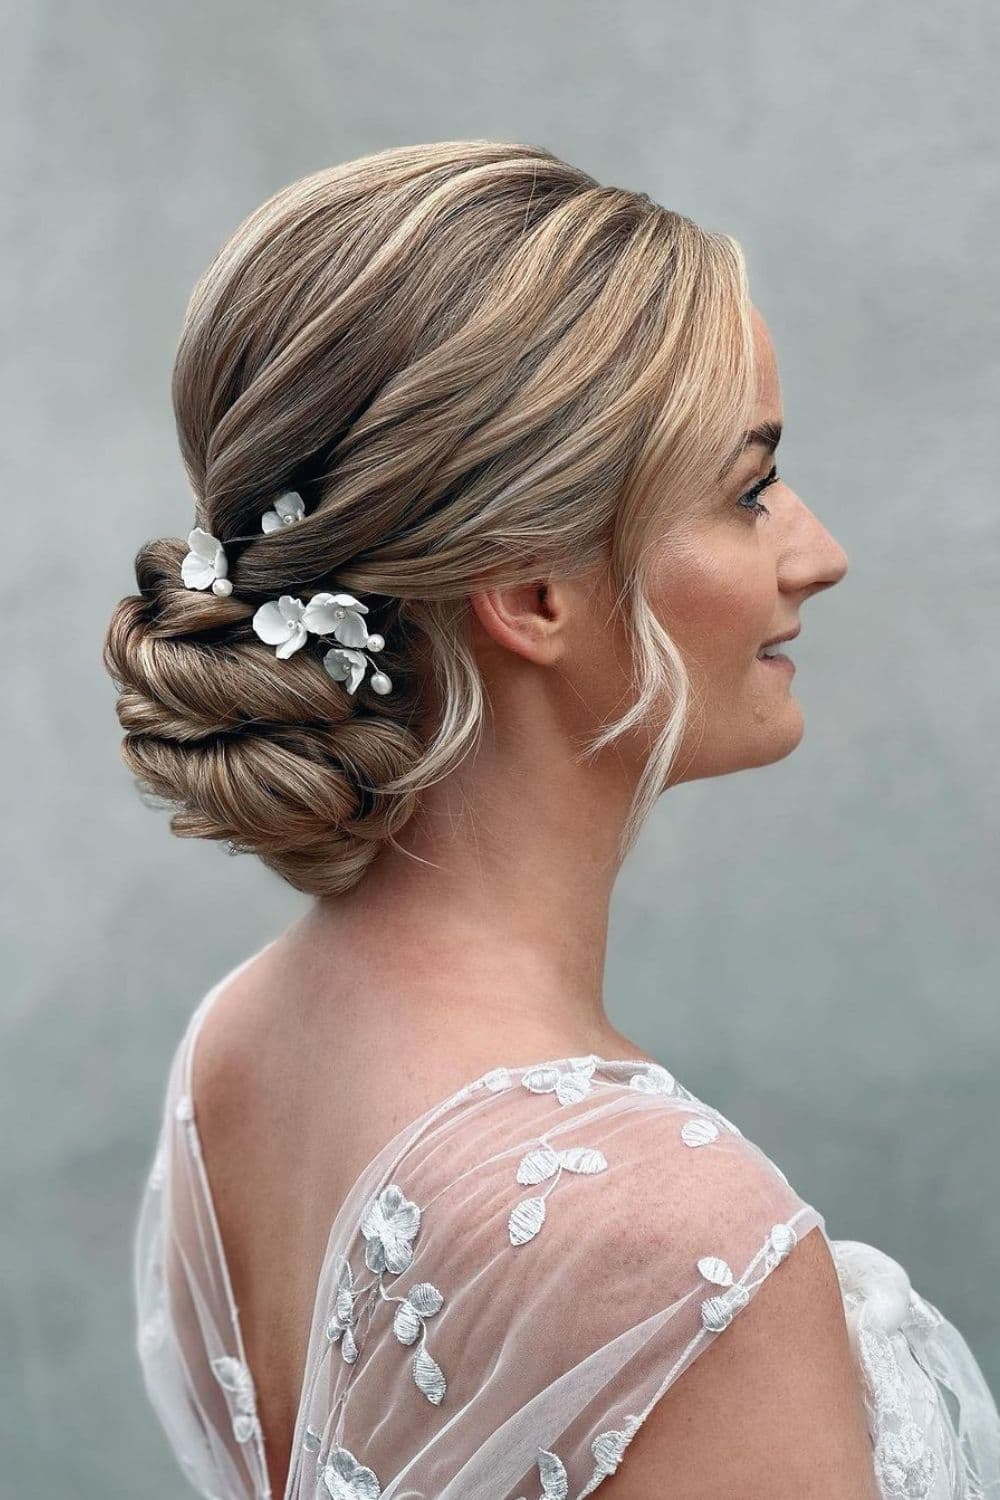 A woman with a blonde low bun and flower hair accessory.